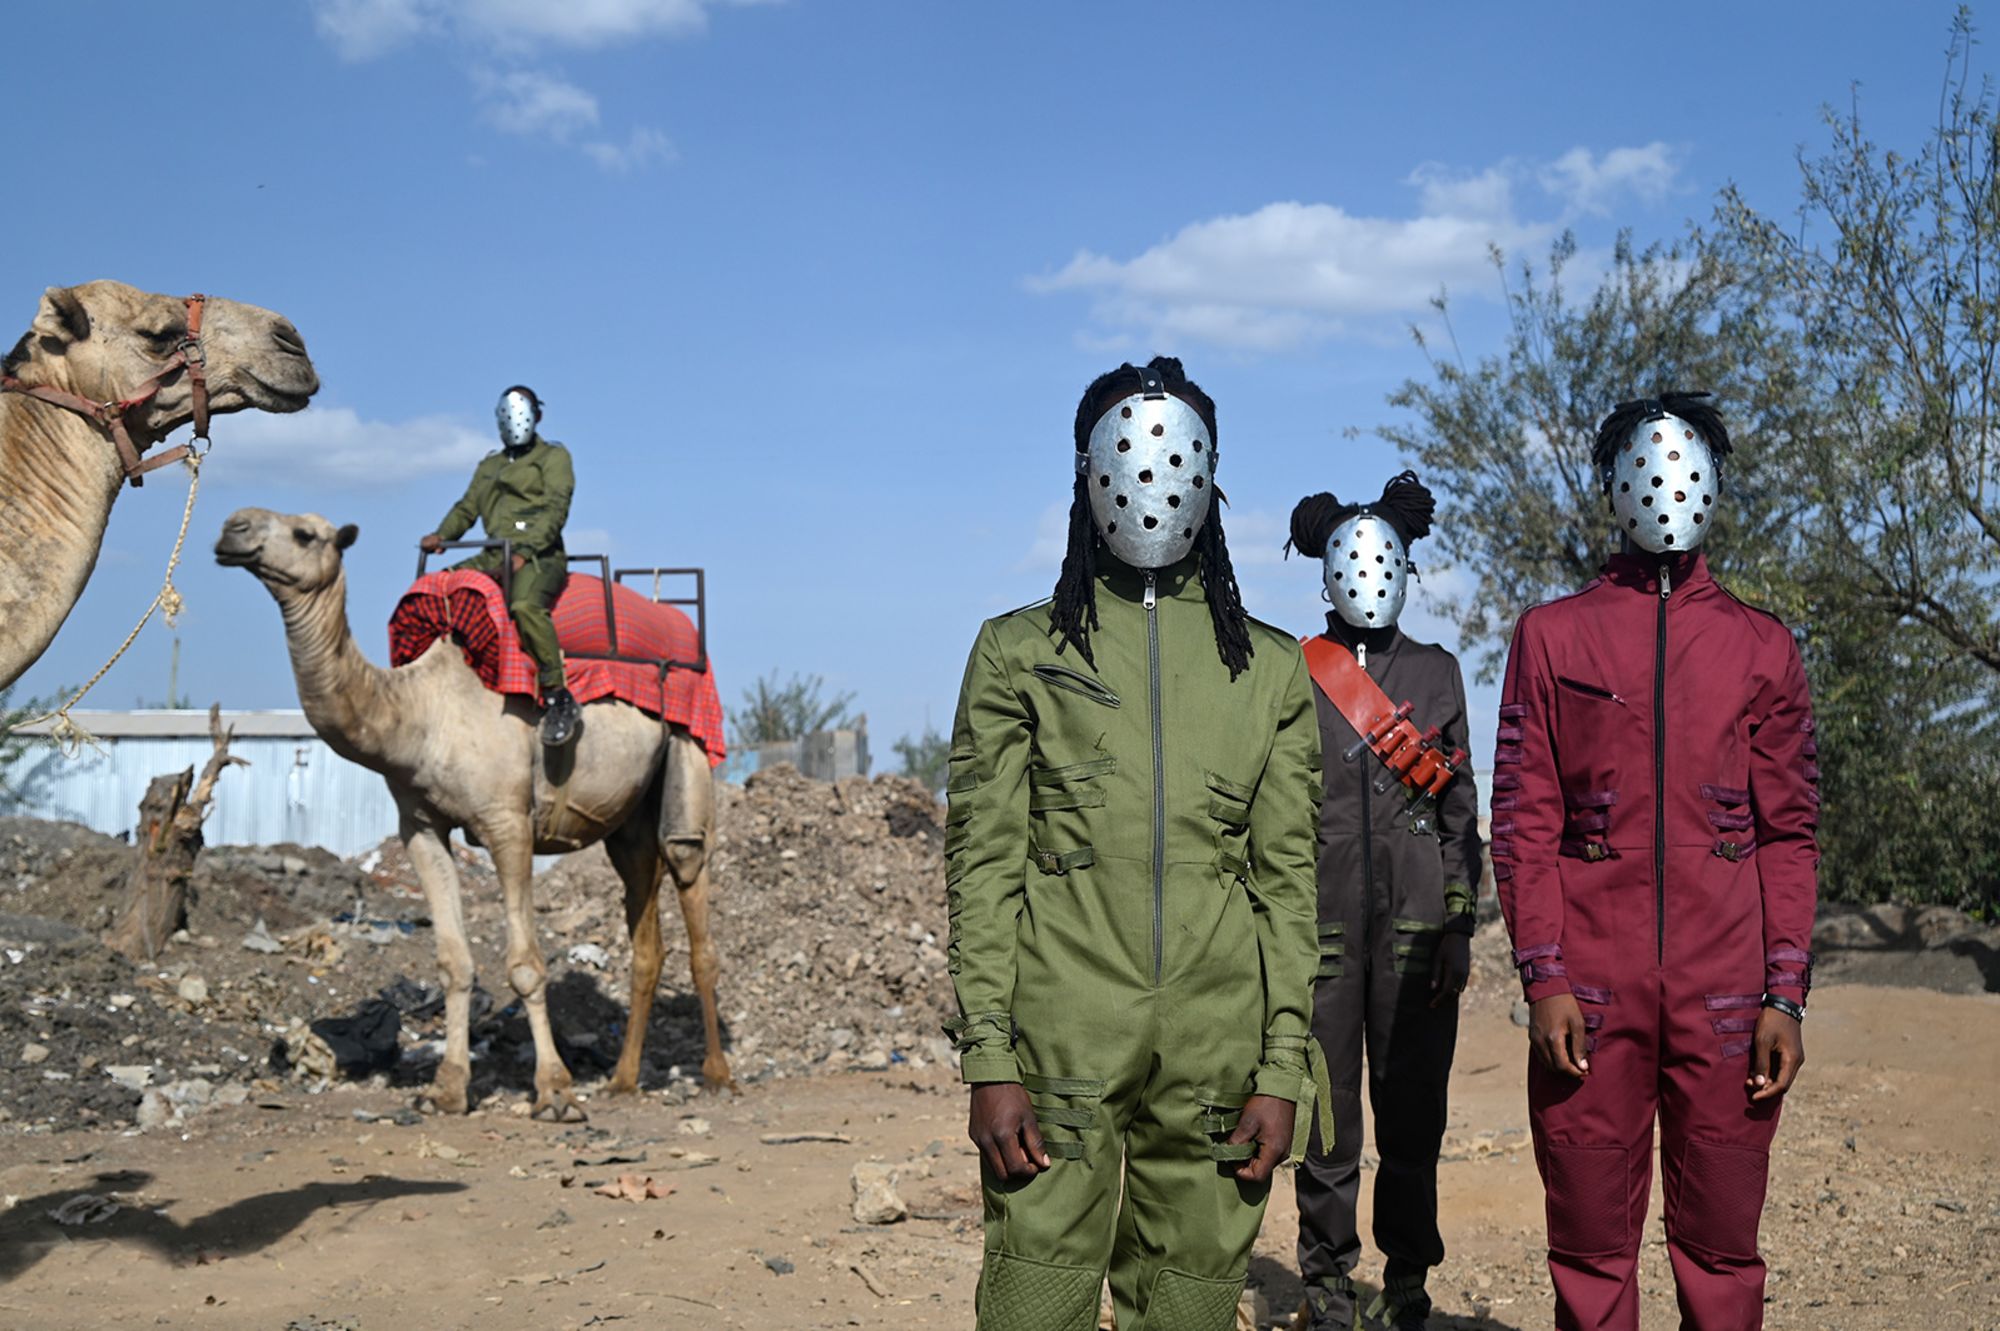 Kairos Futura are a Nairobi-based art collective blurring the lines between art, design, community building and environmental activism.